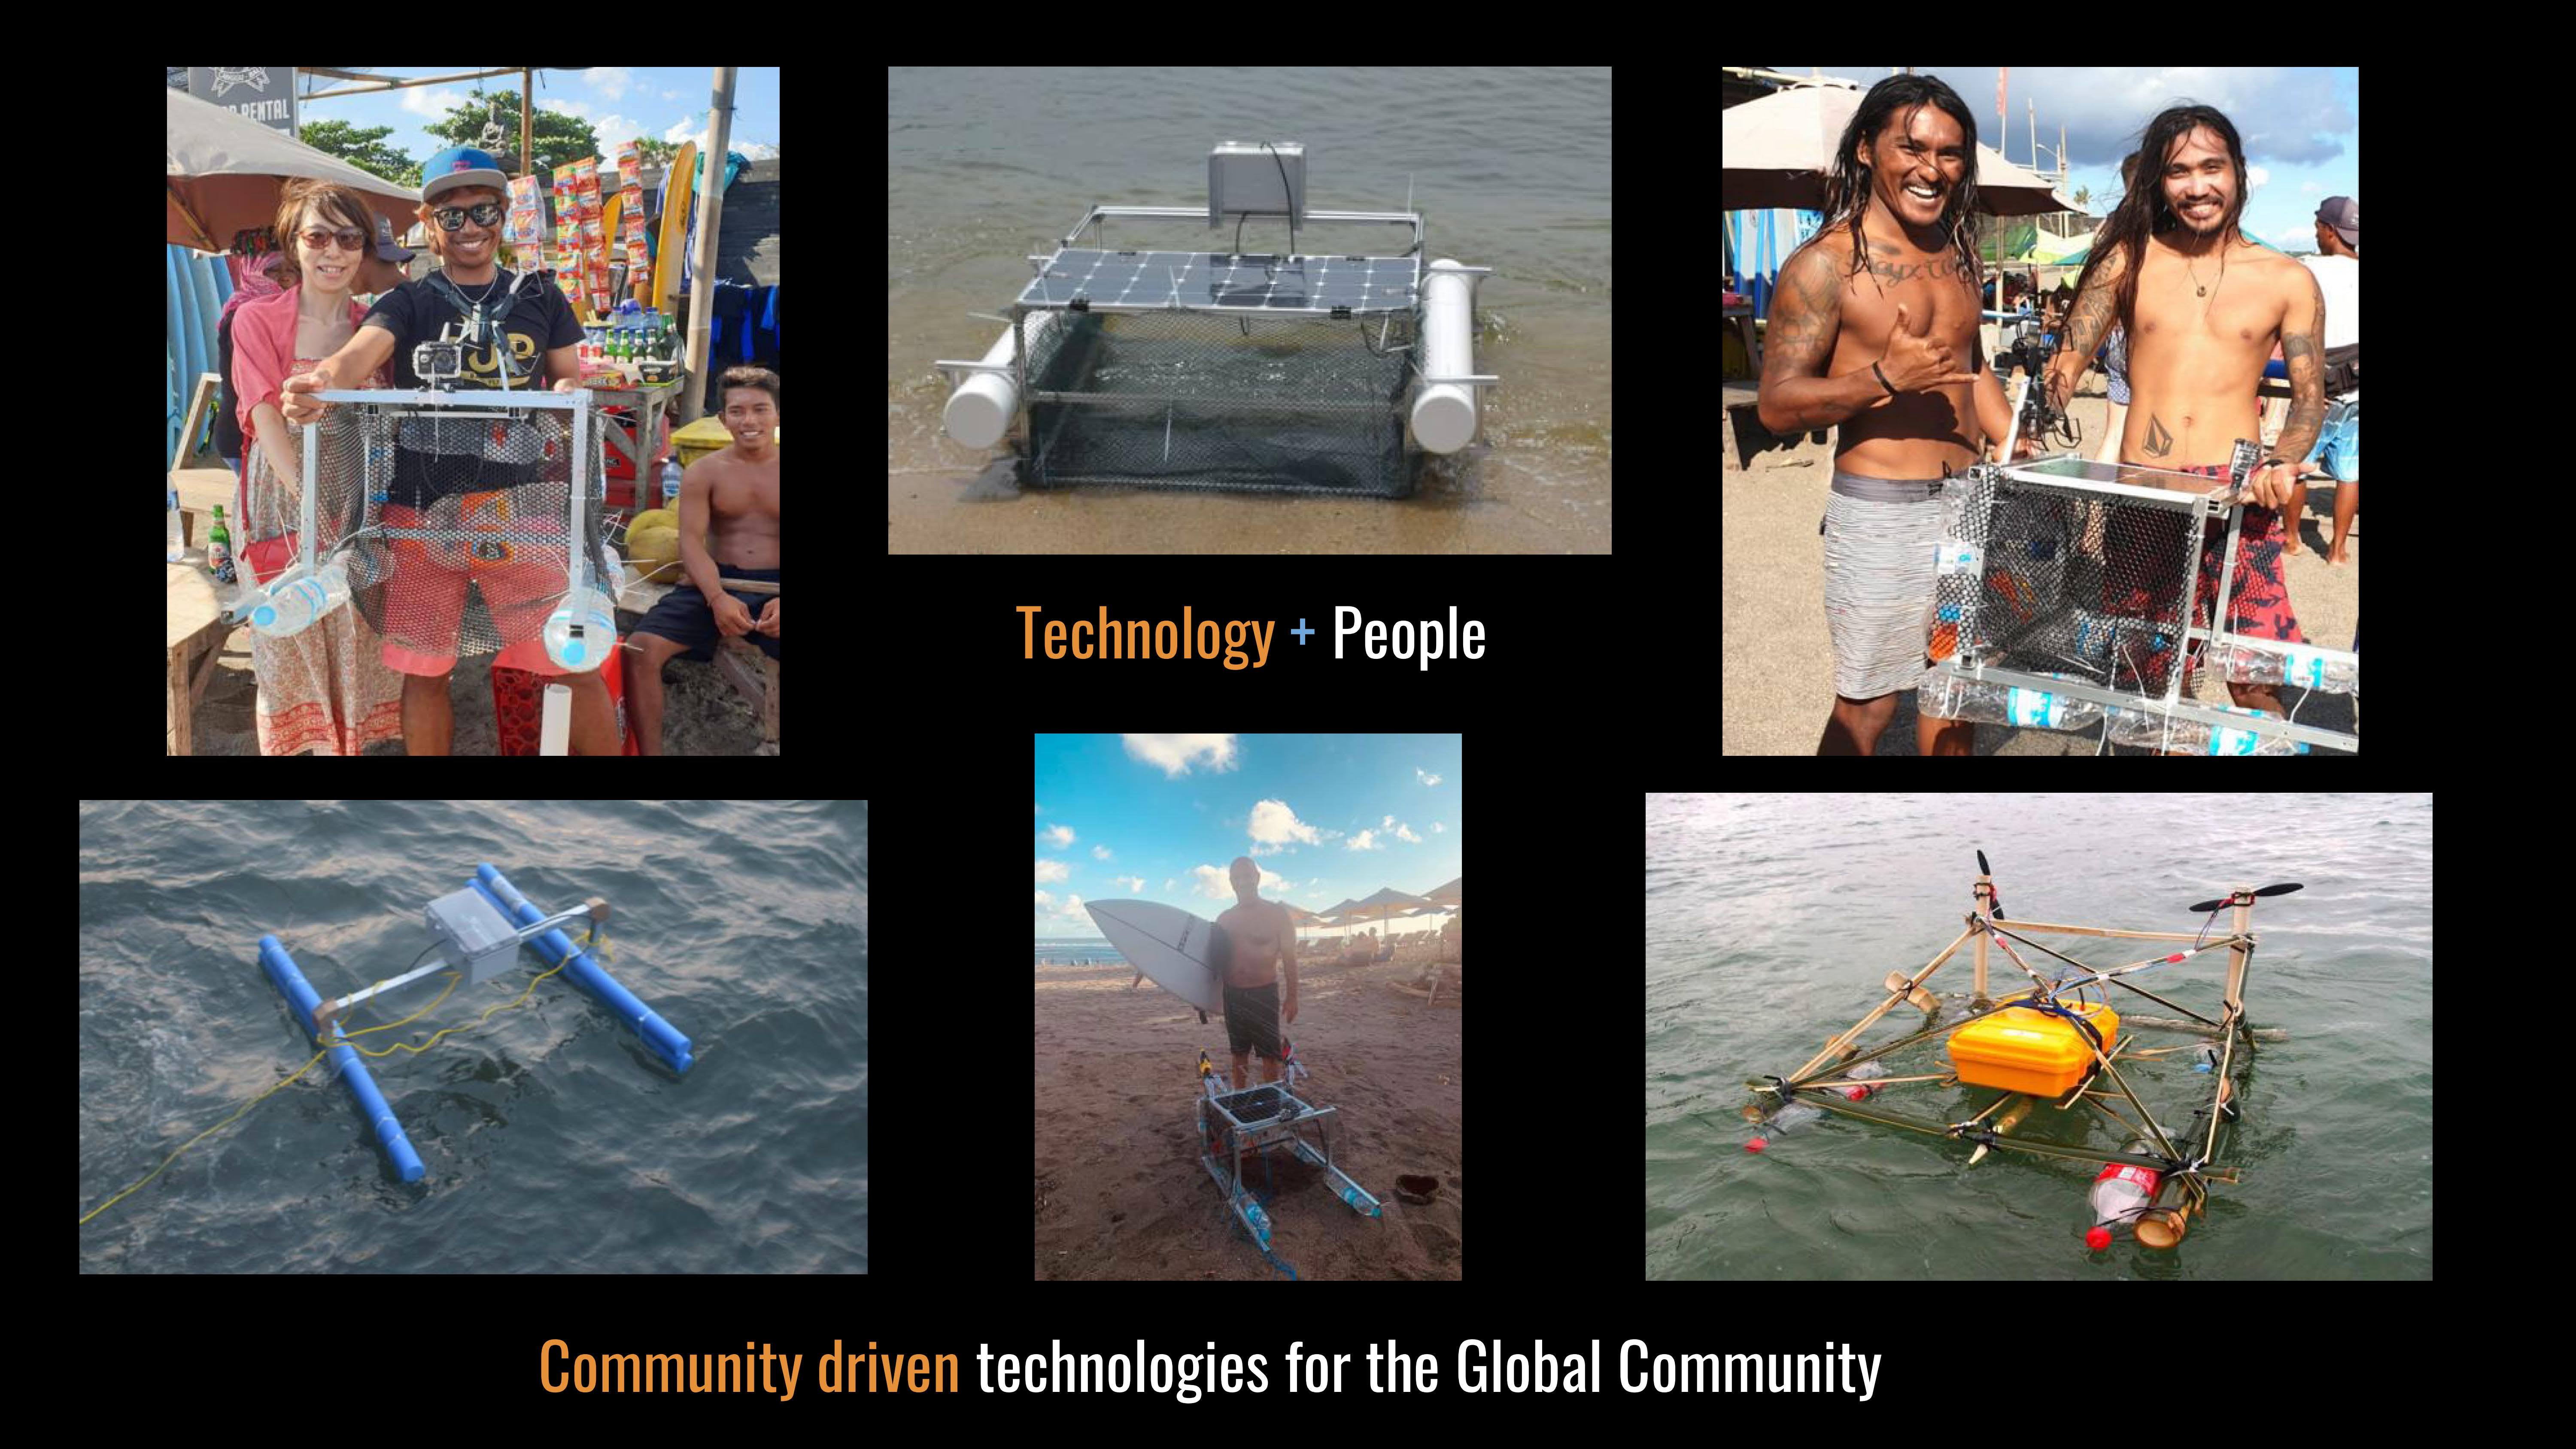 At Clearbot, our aim has always been to harness just the right amount of technology to benefit those living through the ocean plastic epidemic. However, all of this will just be trash talk, if we only sit inside our labs without actually meeting these people.

…And that’s why, back in May, we got out of our labs and took a trip to Bali, Indonesia, to meet two inspiring proponents of ocean cleaning.